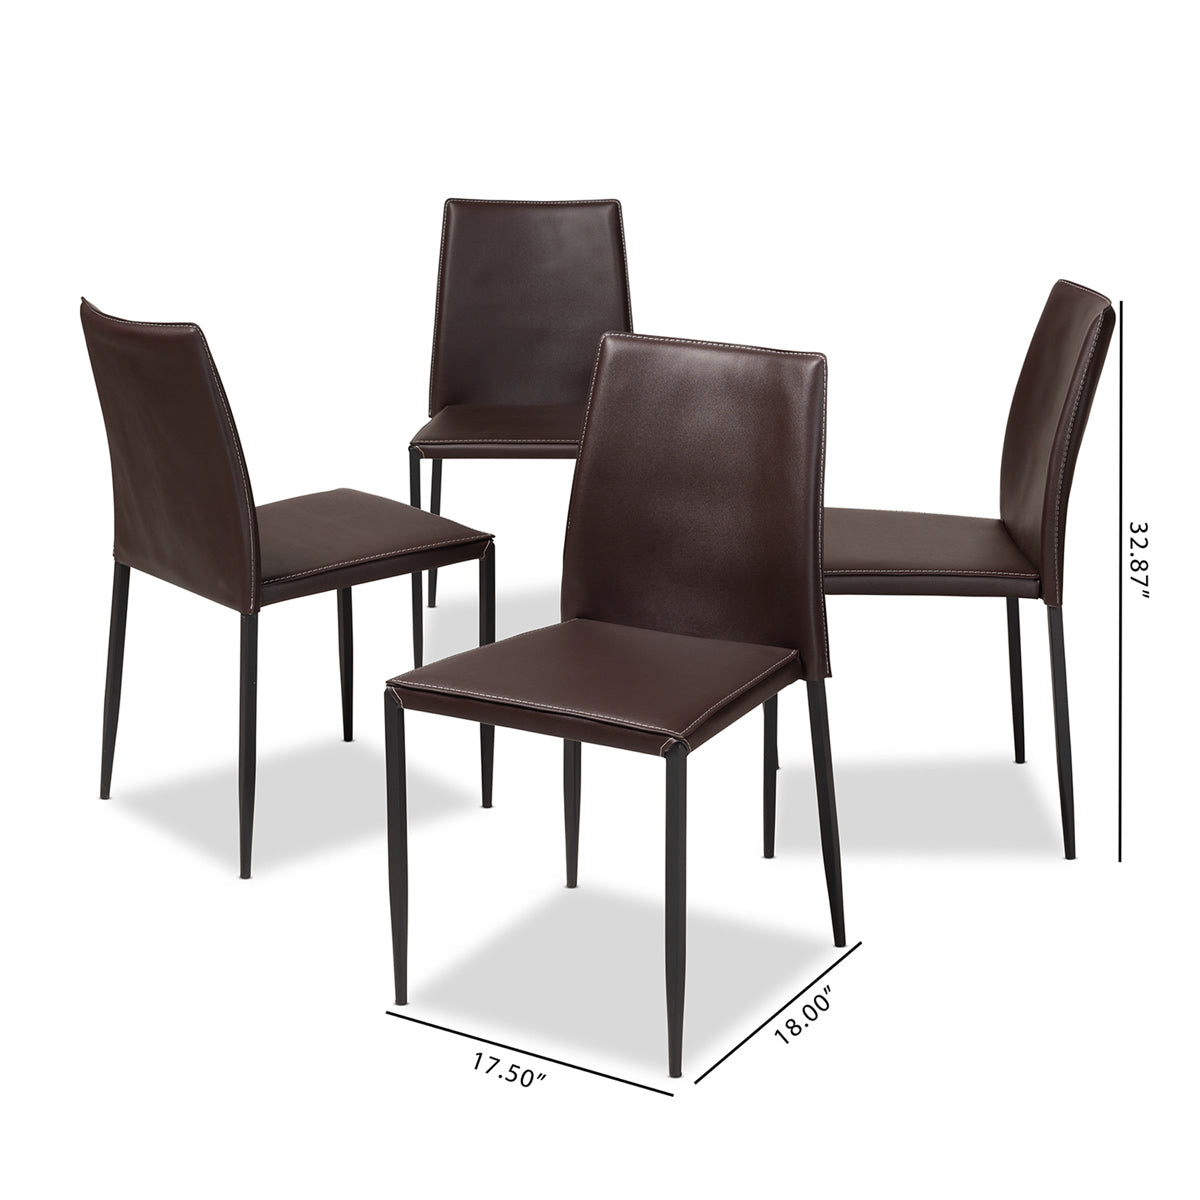 Baxton Studio Pascha Modern and Contemporary Brown Faux Leather Upholstered Dining Chair (Set of 4) Baxton Studio-dining chair-Minimal And Modern - 5